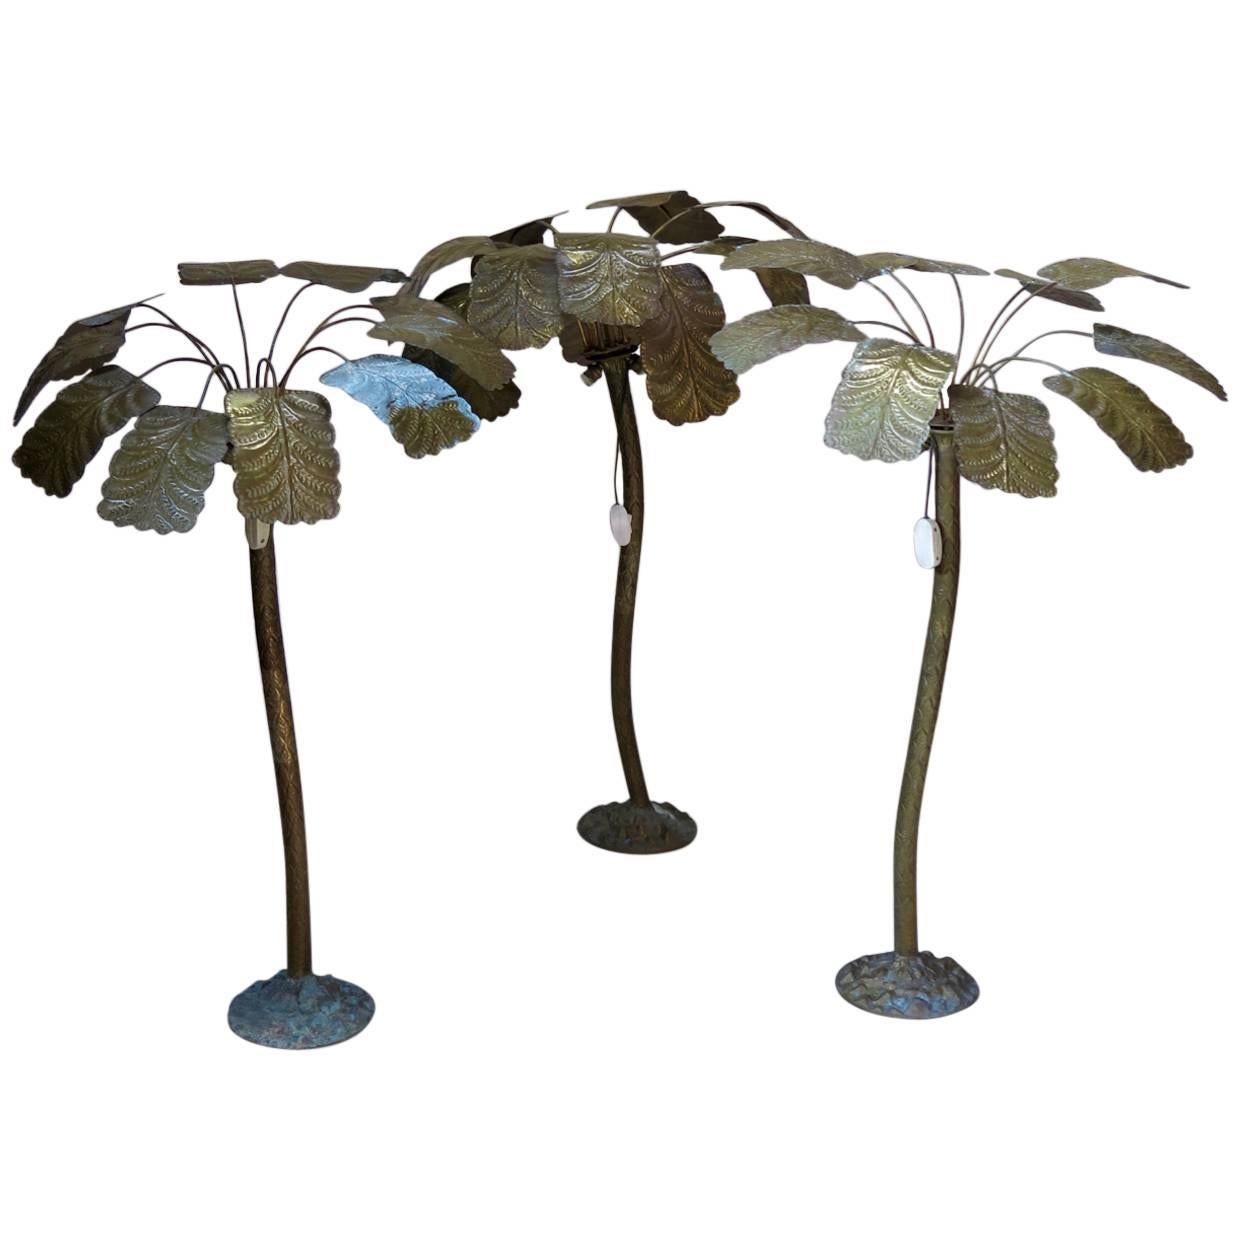 One-of-a-Kind Brass Palmtree Lamps, France, circa 1930s